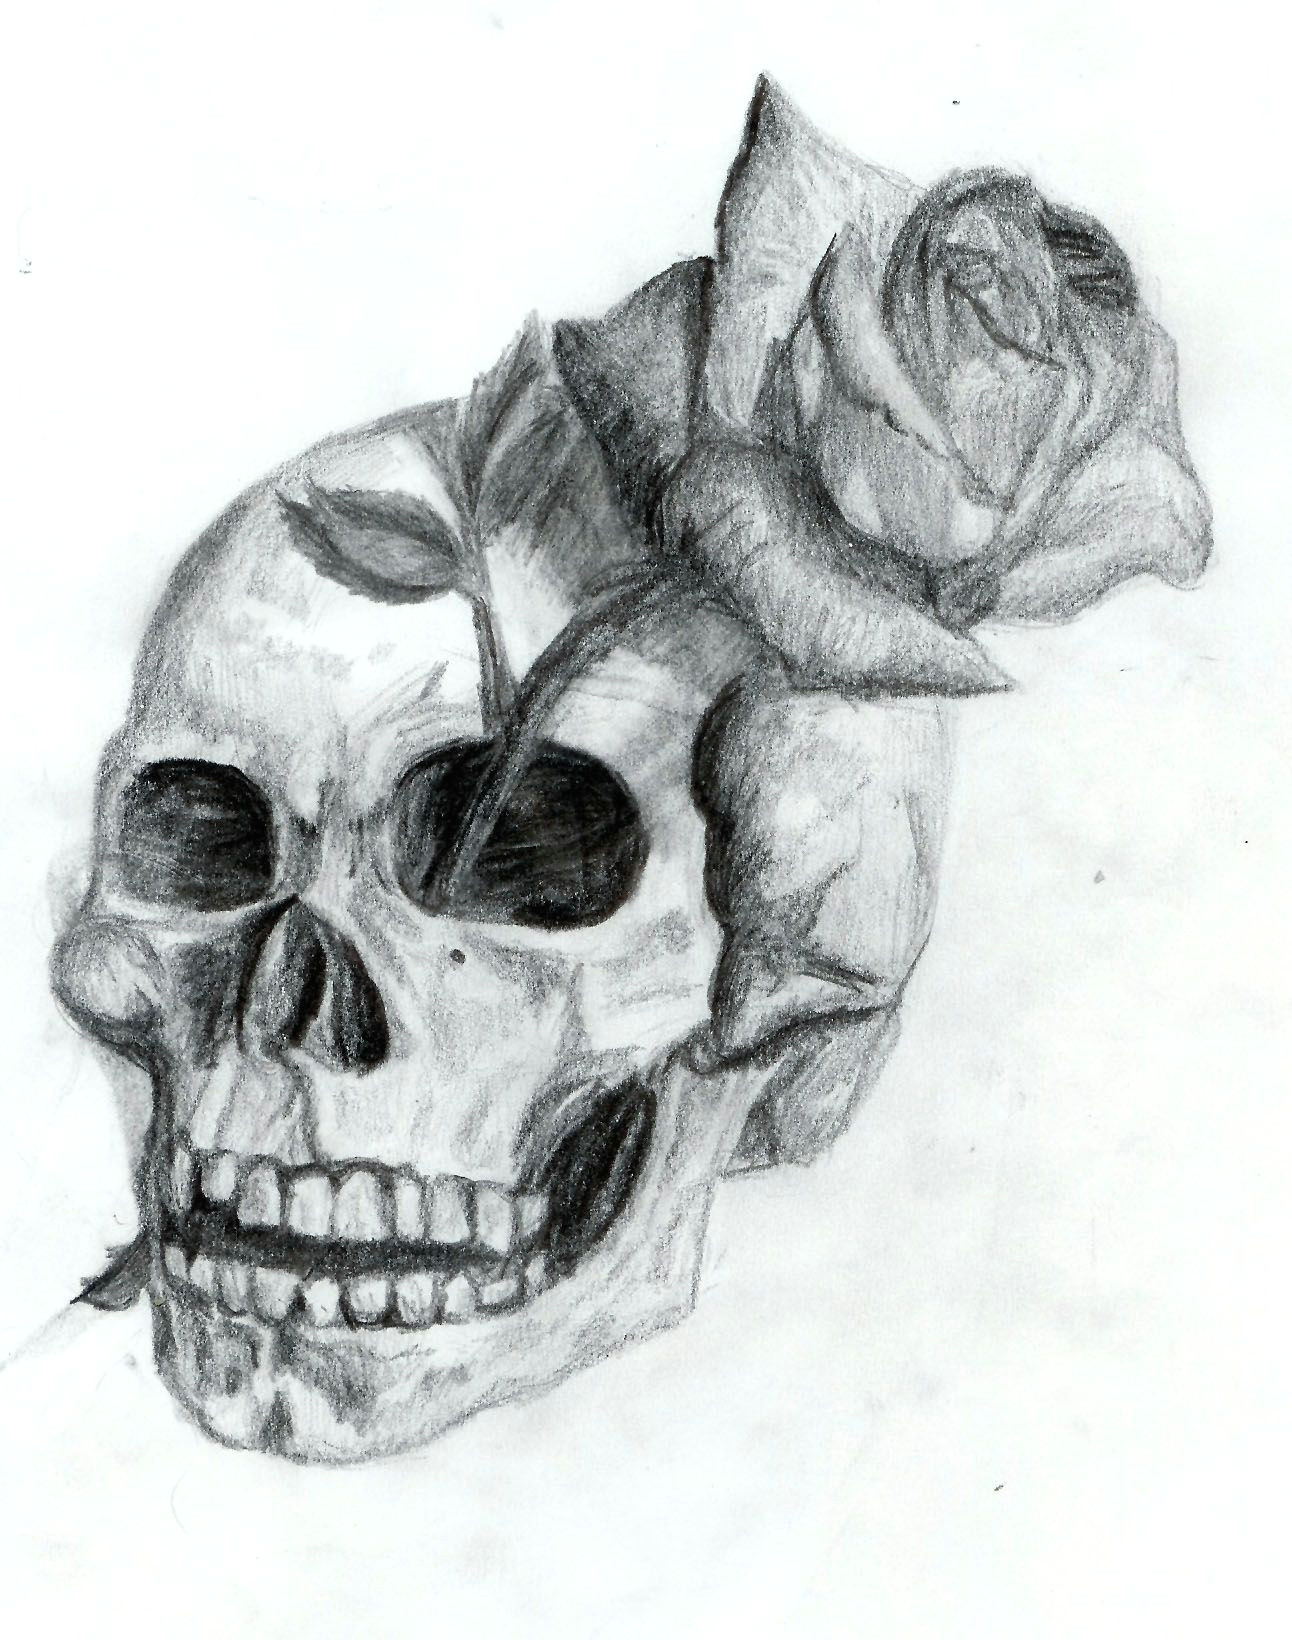 Drawing Of A Rose and Skull Skull and Rose by Dyslogistic On Deviantart Skull Art Draw